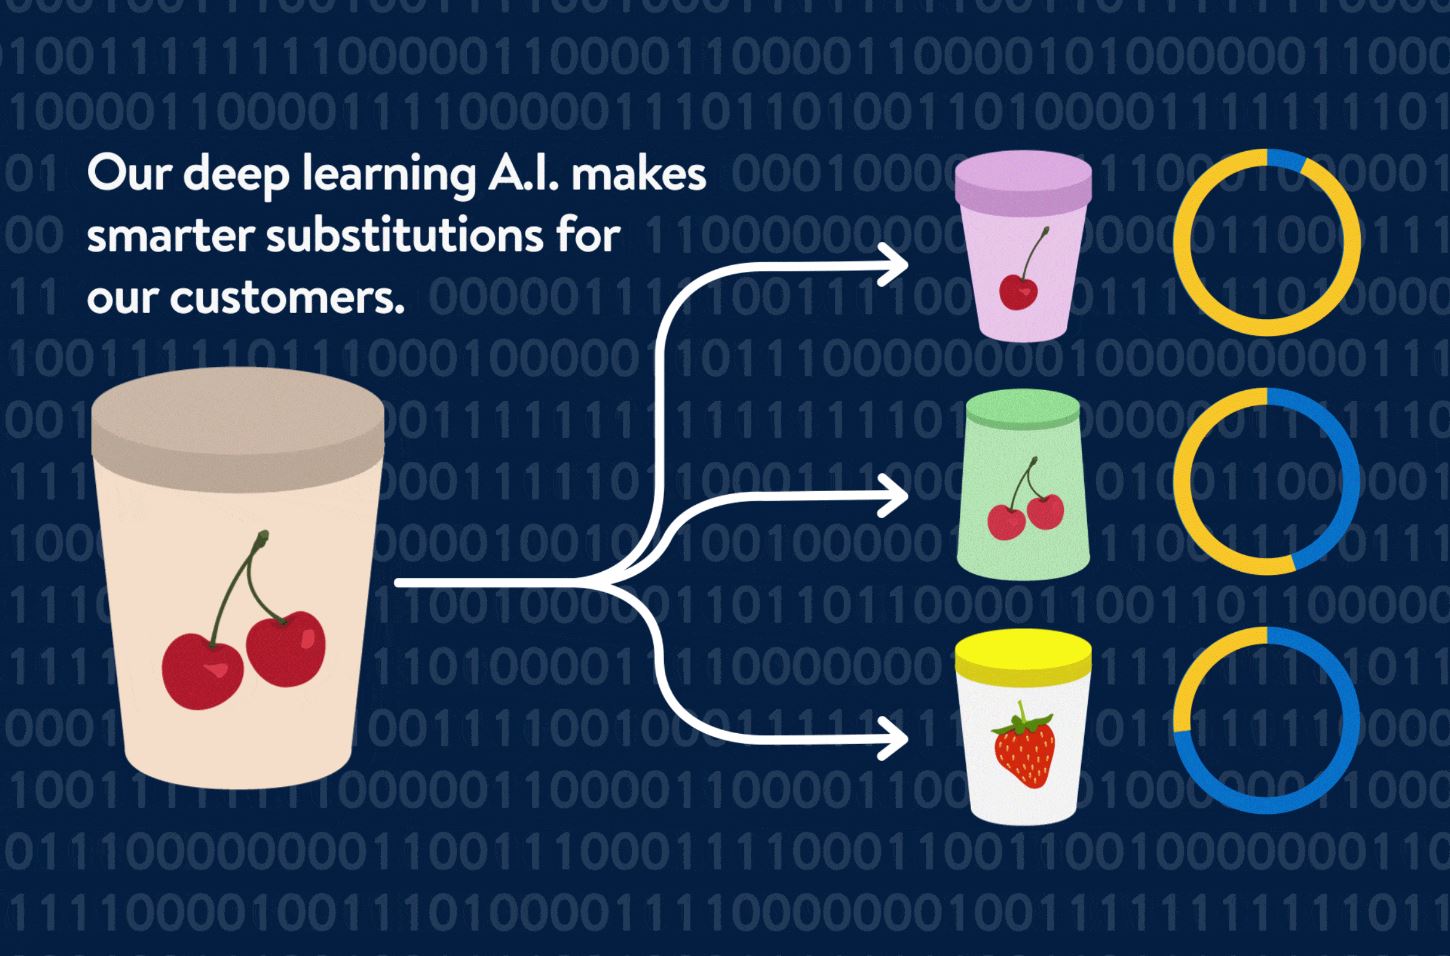 Walmart AI for grocery substitutions - image courtesy of Walmart Press Center